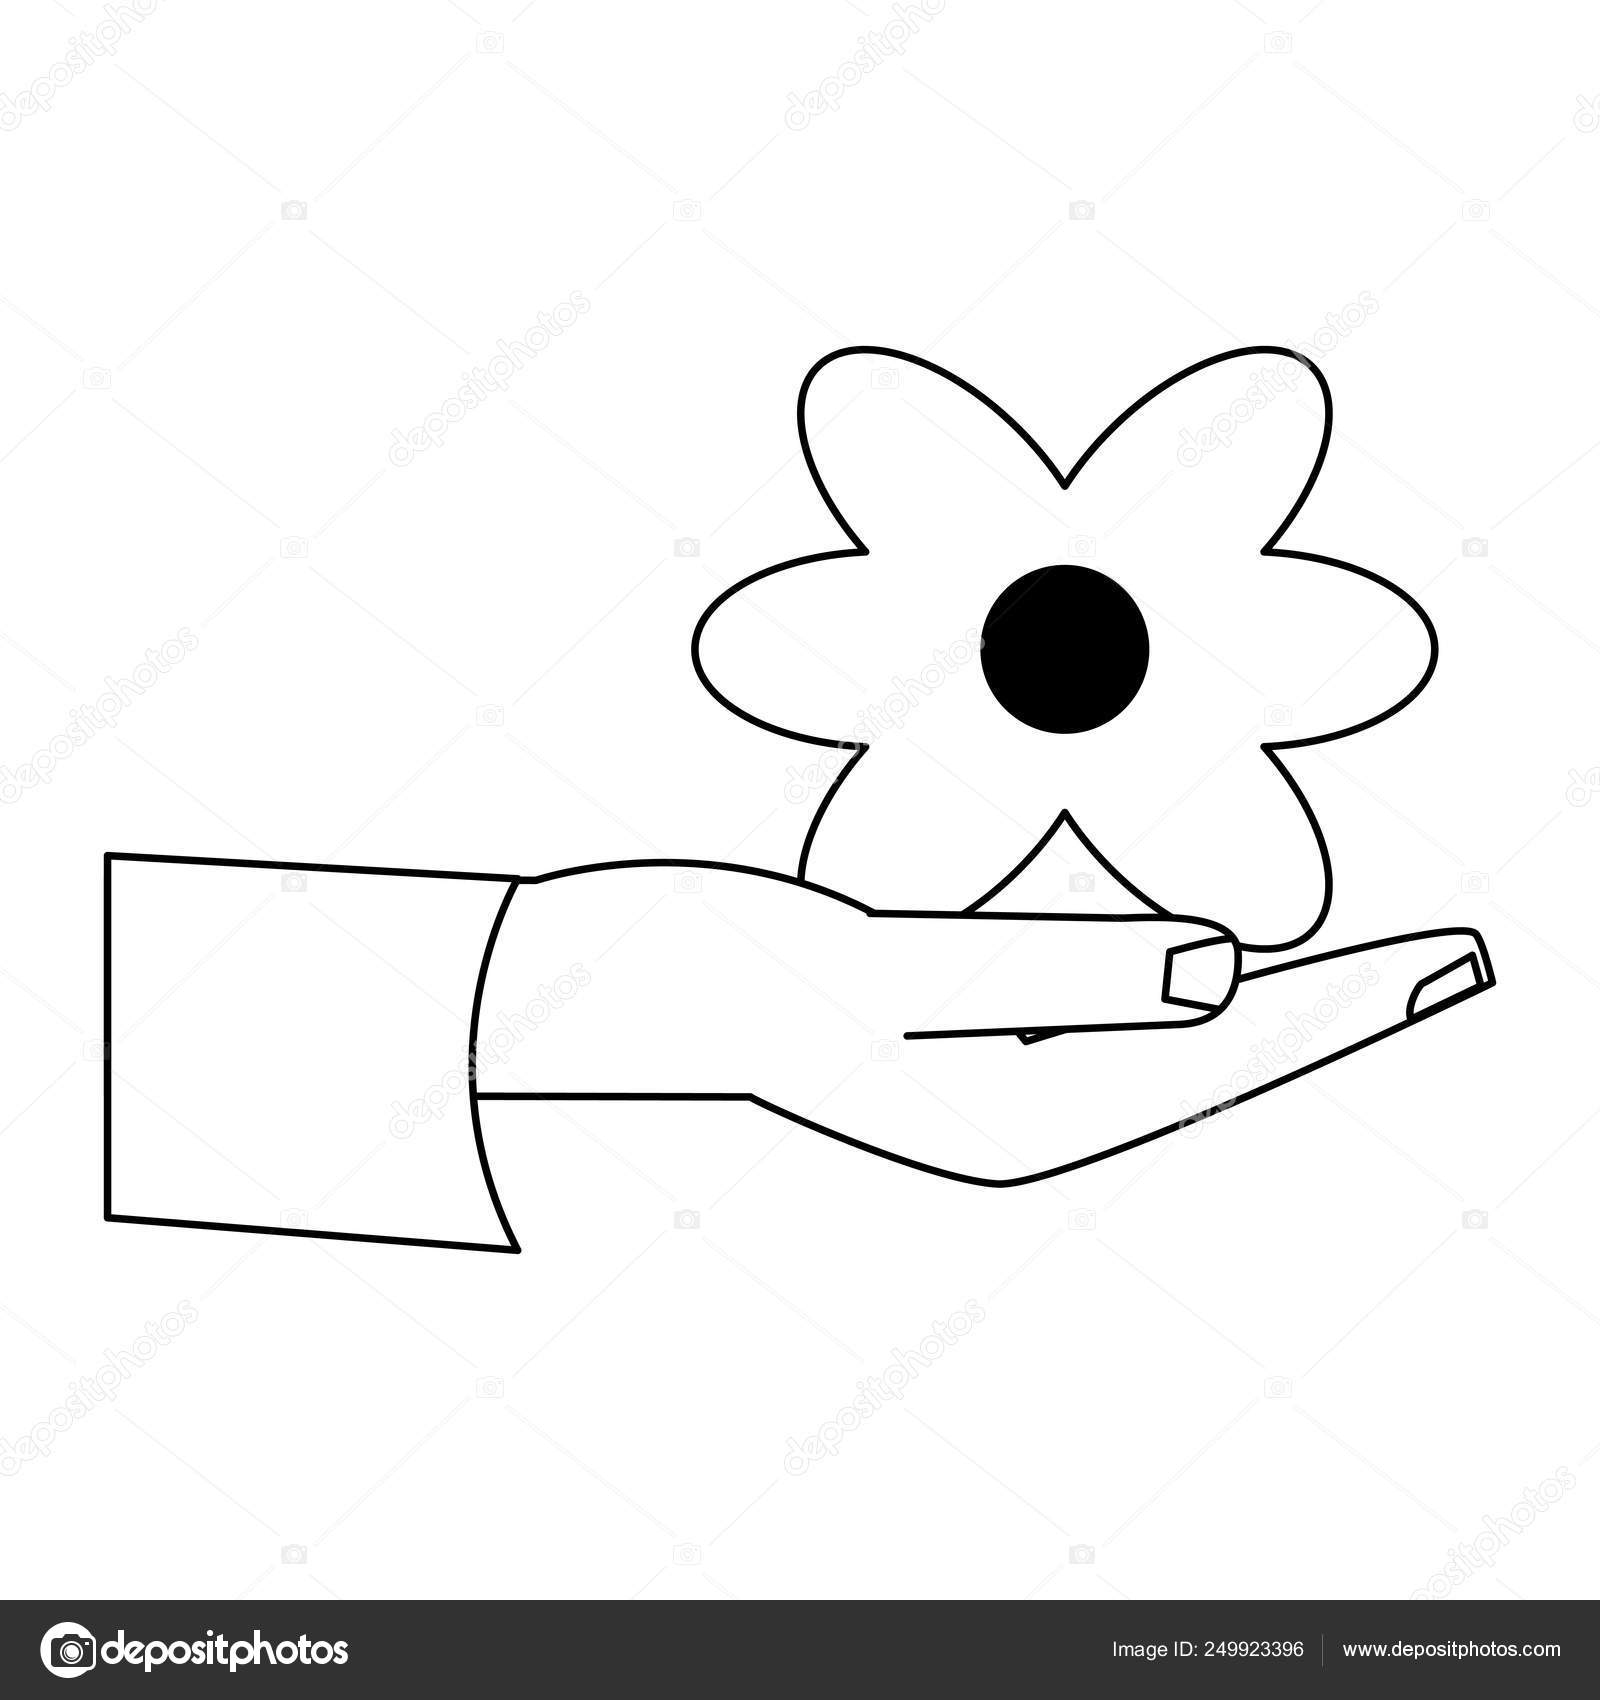 Featured image of post Cartoon Hands Holding Flowers - Cute baby mouse holding flower with dragonfly hand drawn cartoon animal.